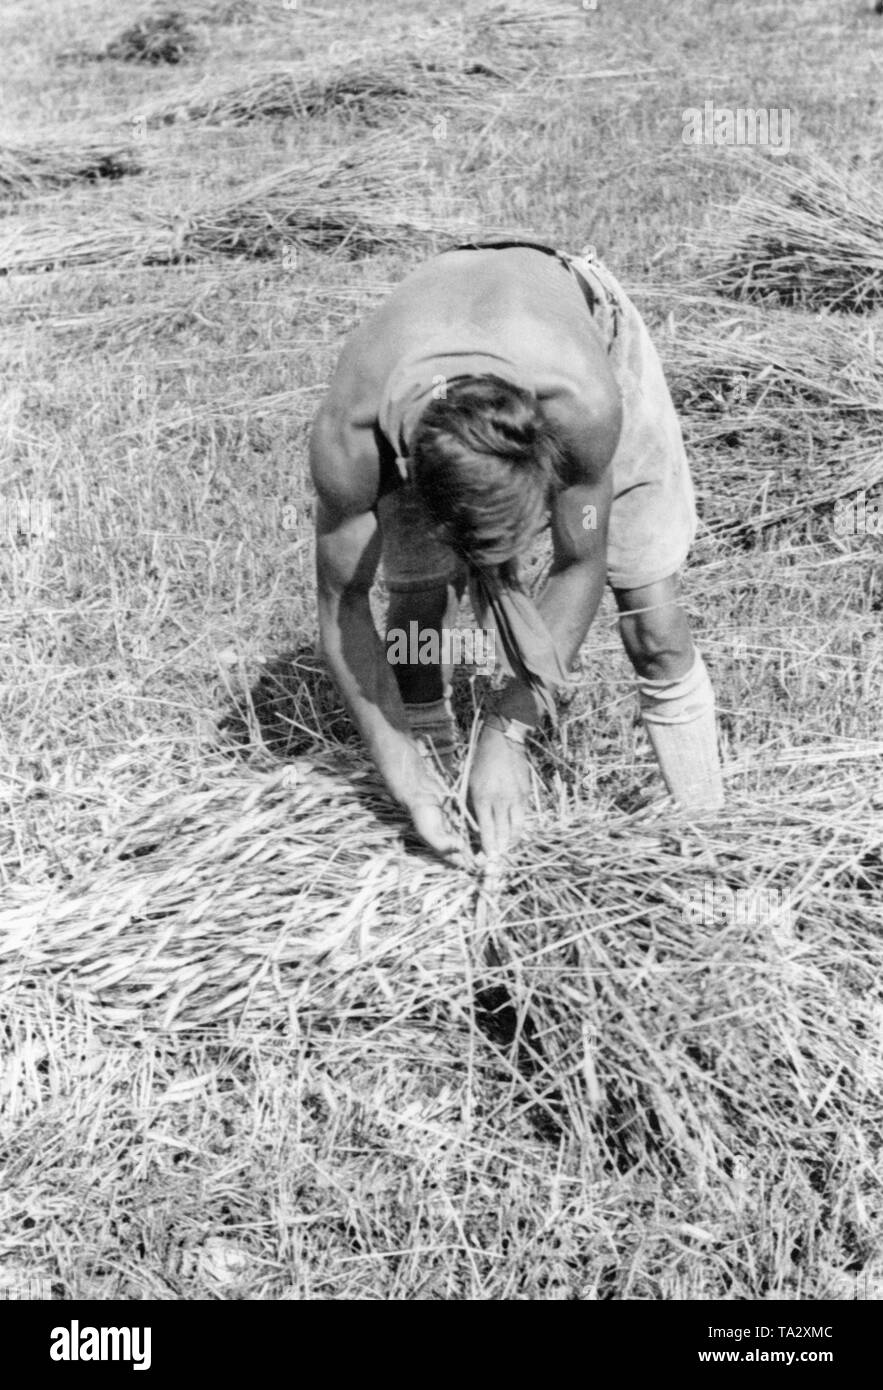 A young man bundles grain on a field as part of the Landdienst (Agricultural Service) of the Deutsche Freischar. Stock Photo